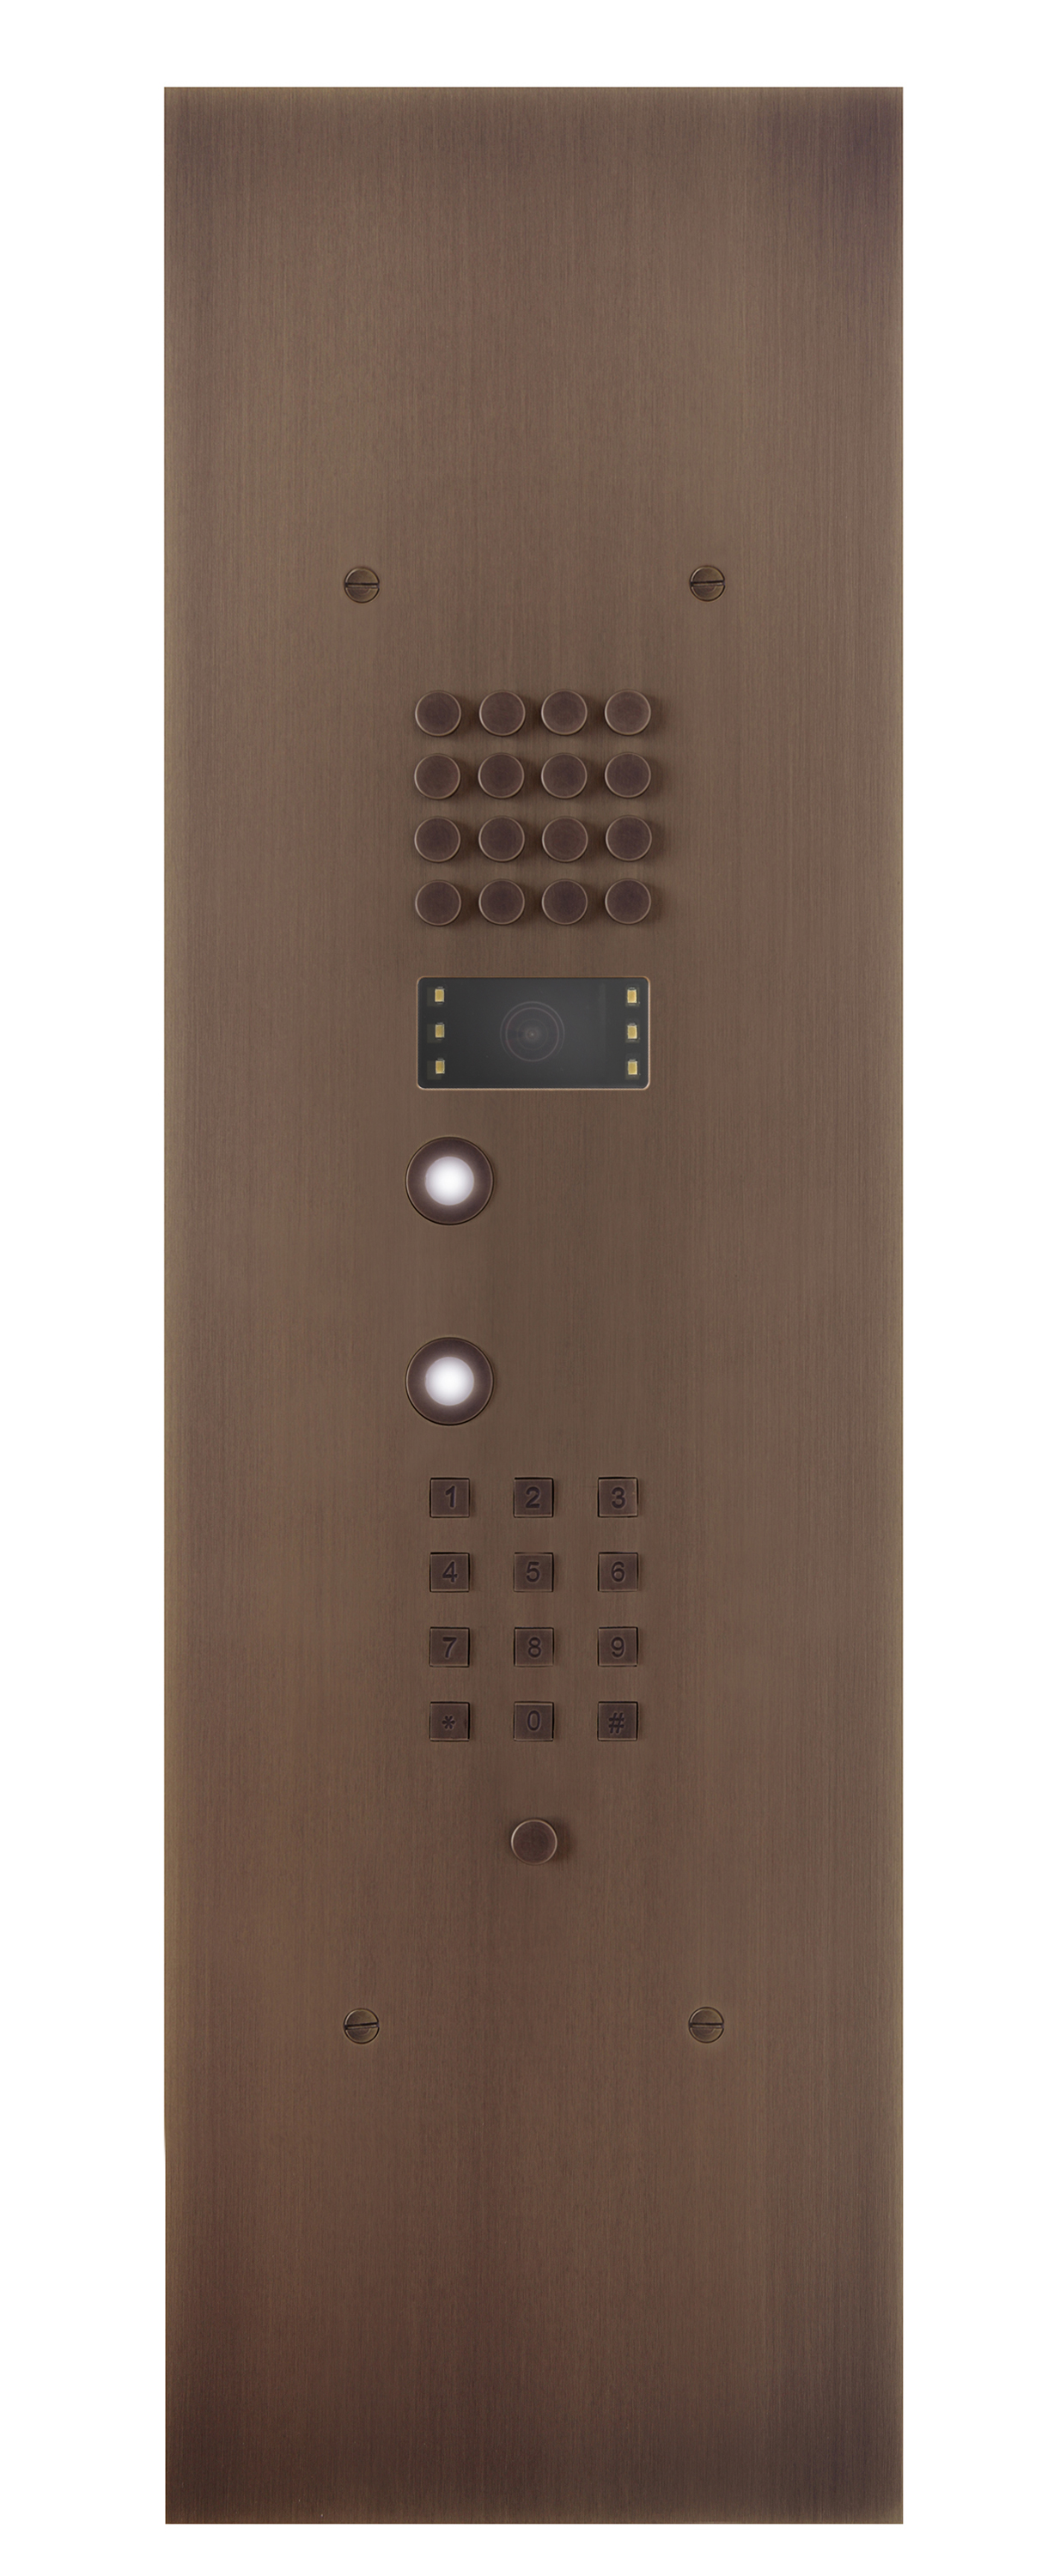 Wizard Bronze rustic IP 2 buttons large model, keypad and video color